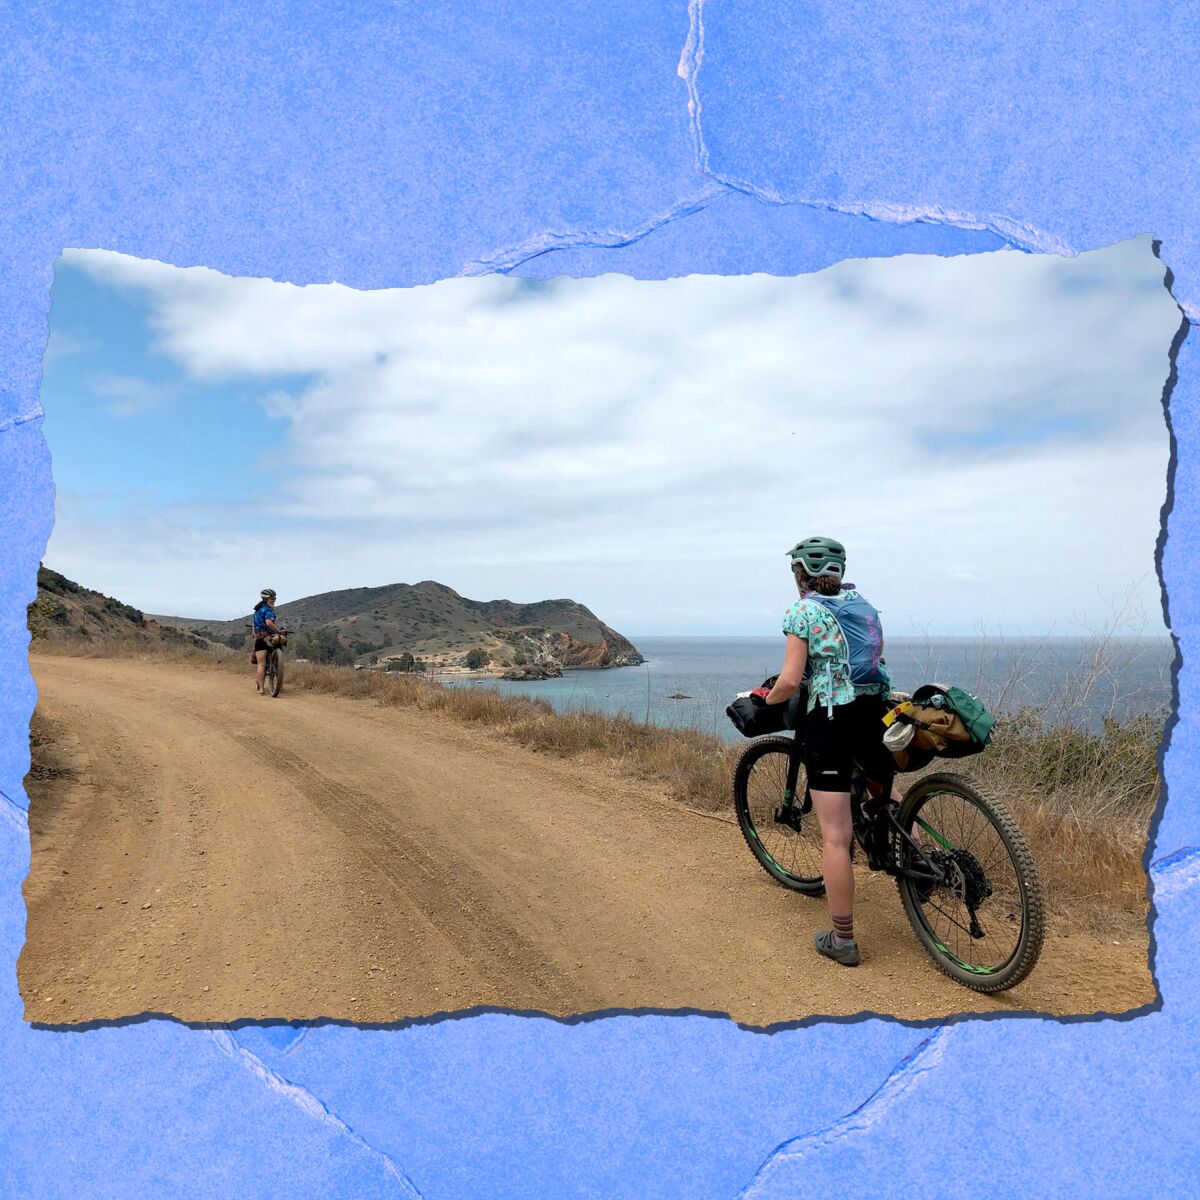 Two people on bikes along a seaside dirt road.